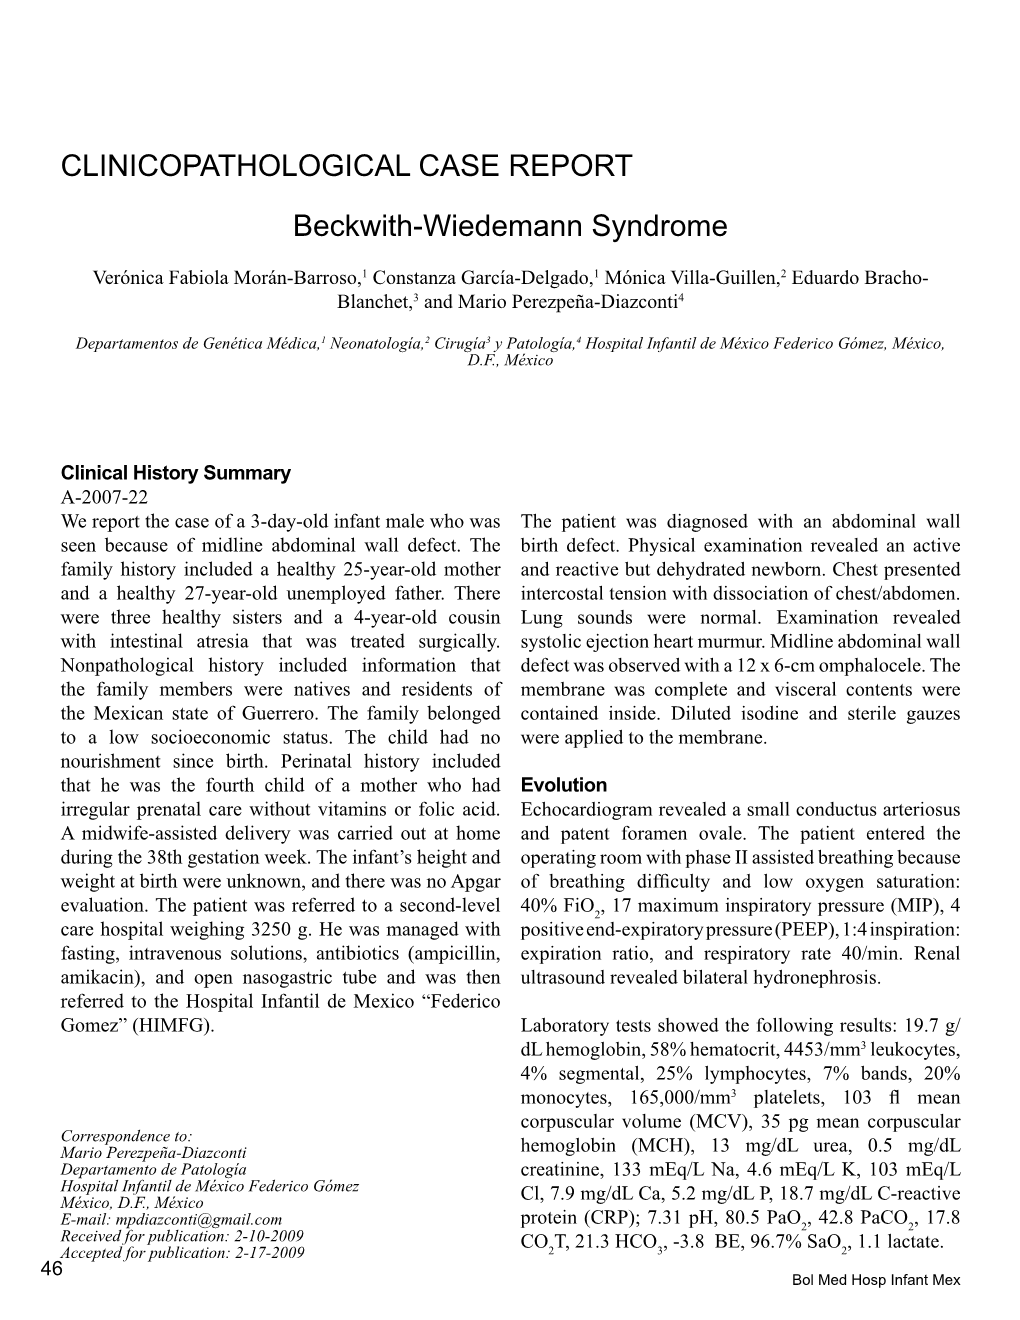 CLINICOPATHOLOGICAL CASE REPORT Beckwith-Wiedemann Syndrome